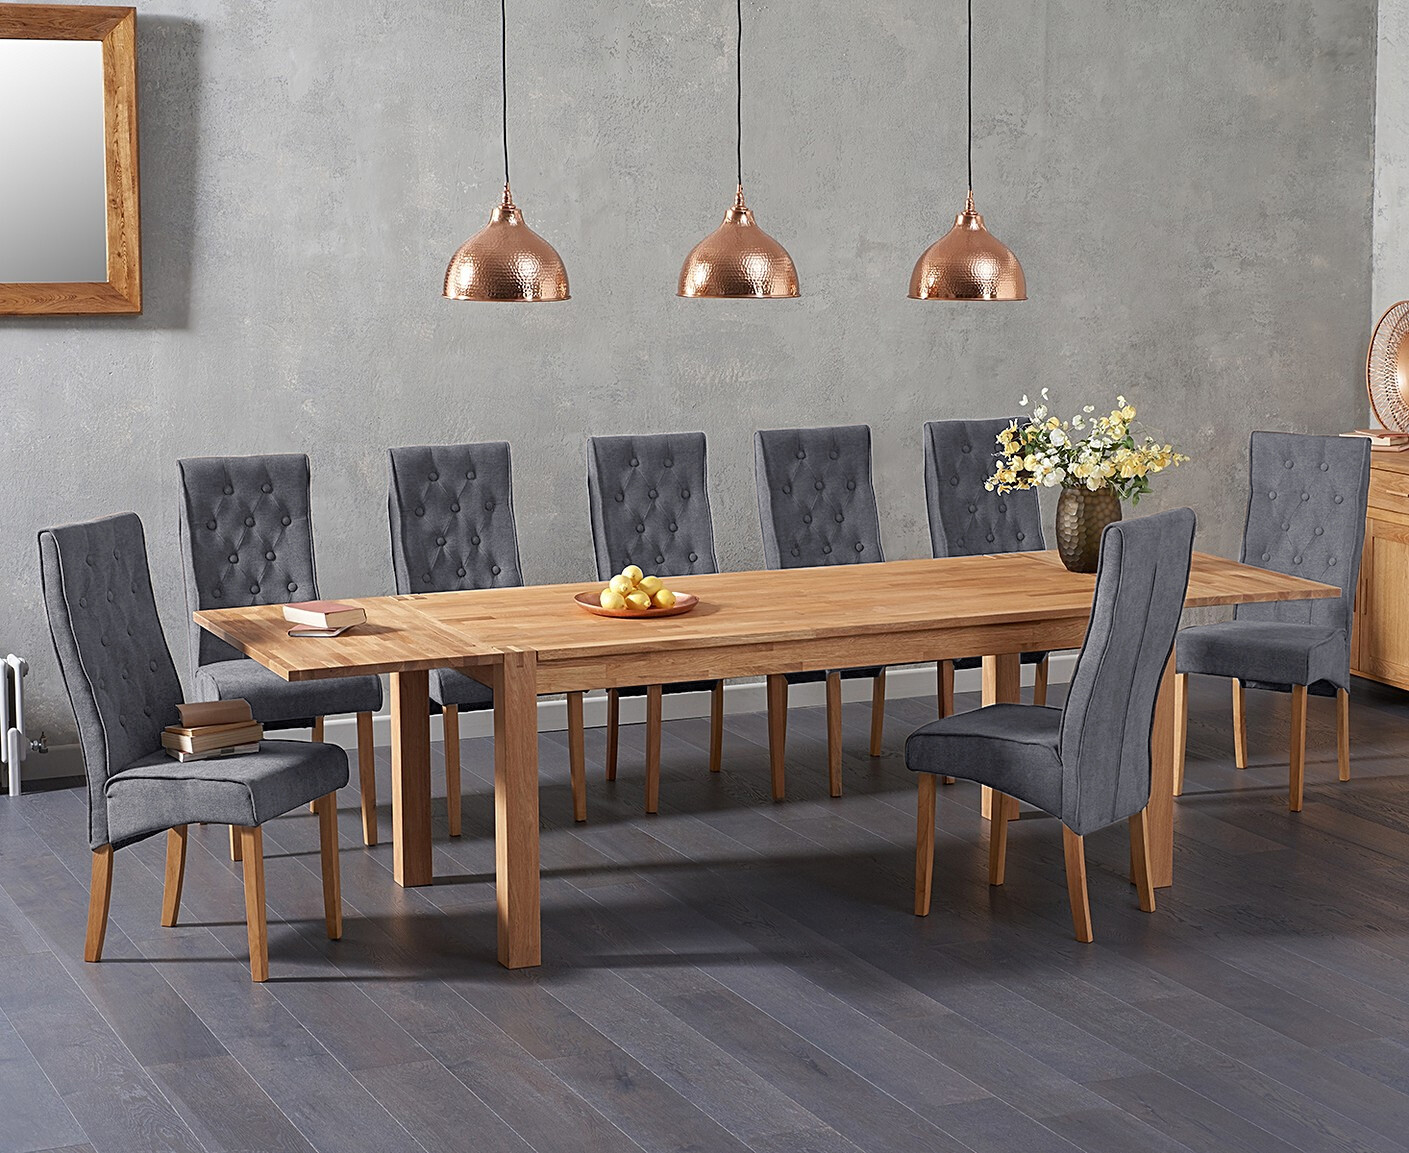 Thetford 180cm Oak Dining Table With 6 Grey Maya Chairs With Thetford 45cm Oak Extensions